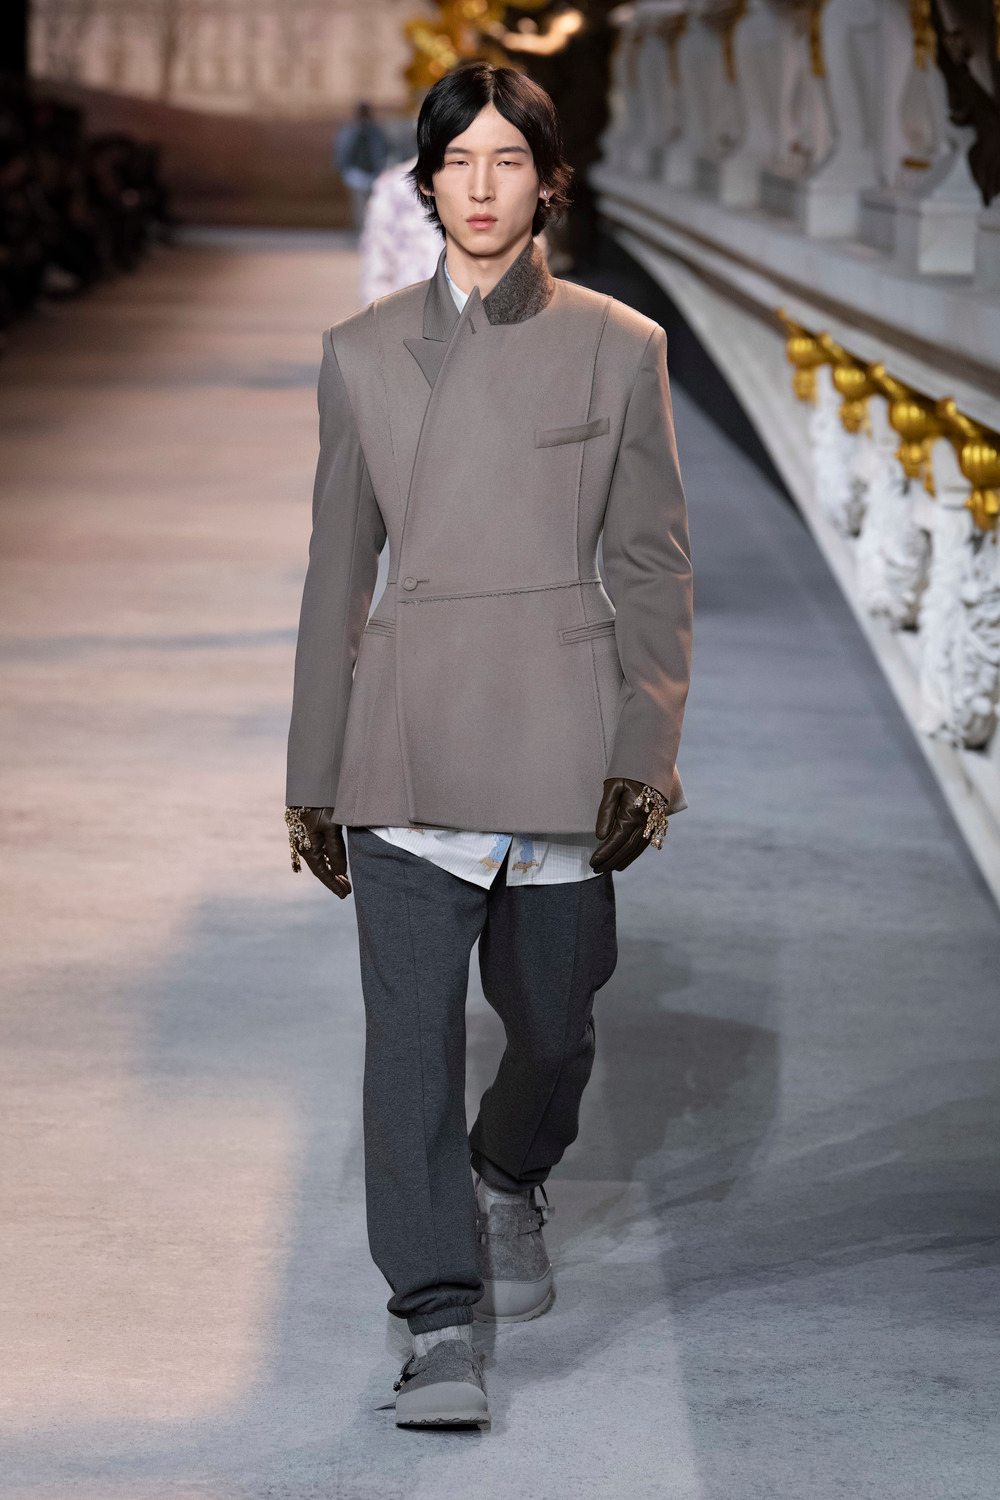 Kim Jones revisits Christian Dior’s essentials for his Fall/Winter 2022-2023 men’s collection